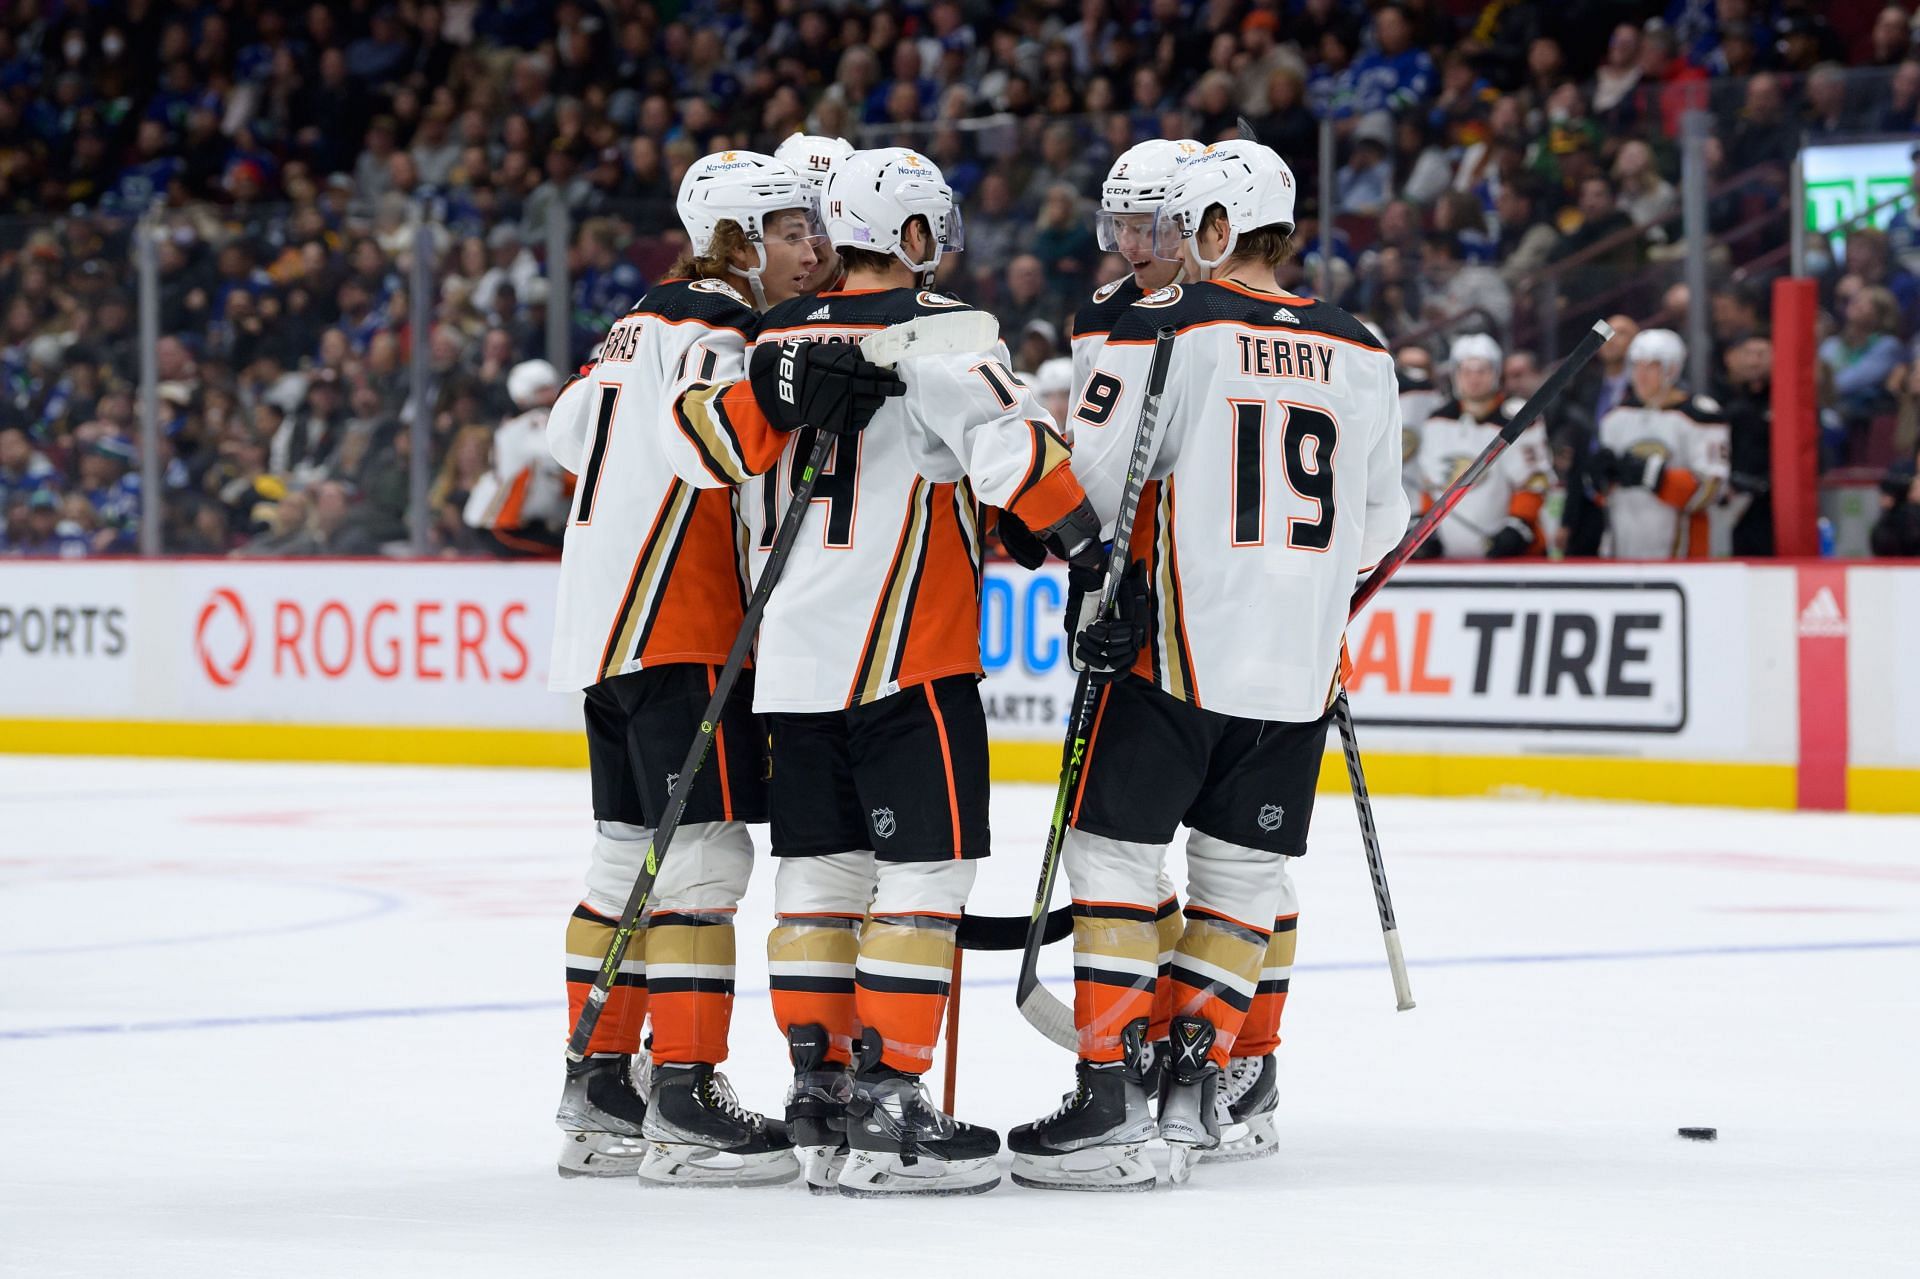 Anaheim Ducks injury report ft Trevor Zegras, Troy Terry, and more